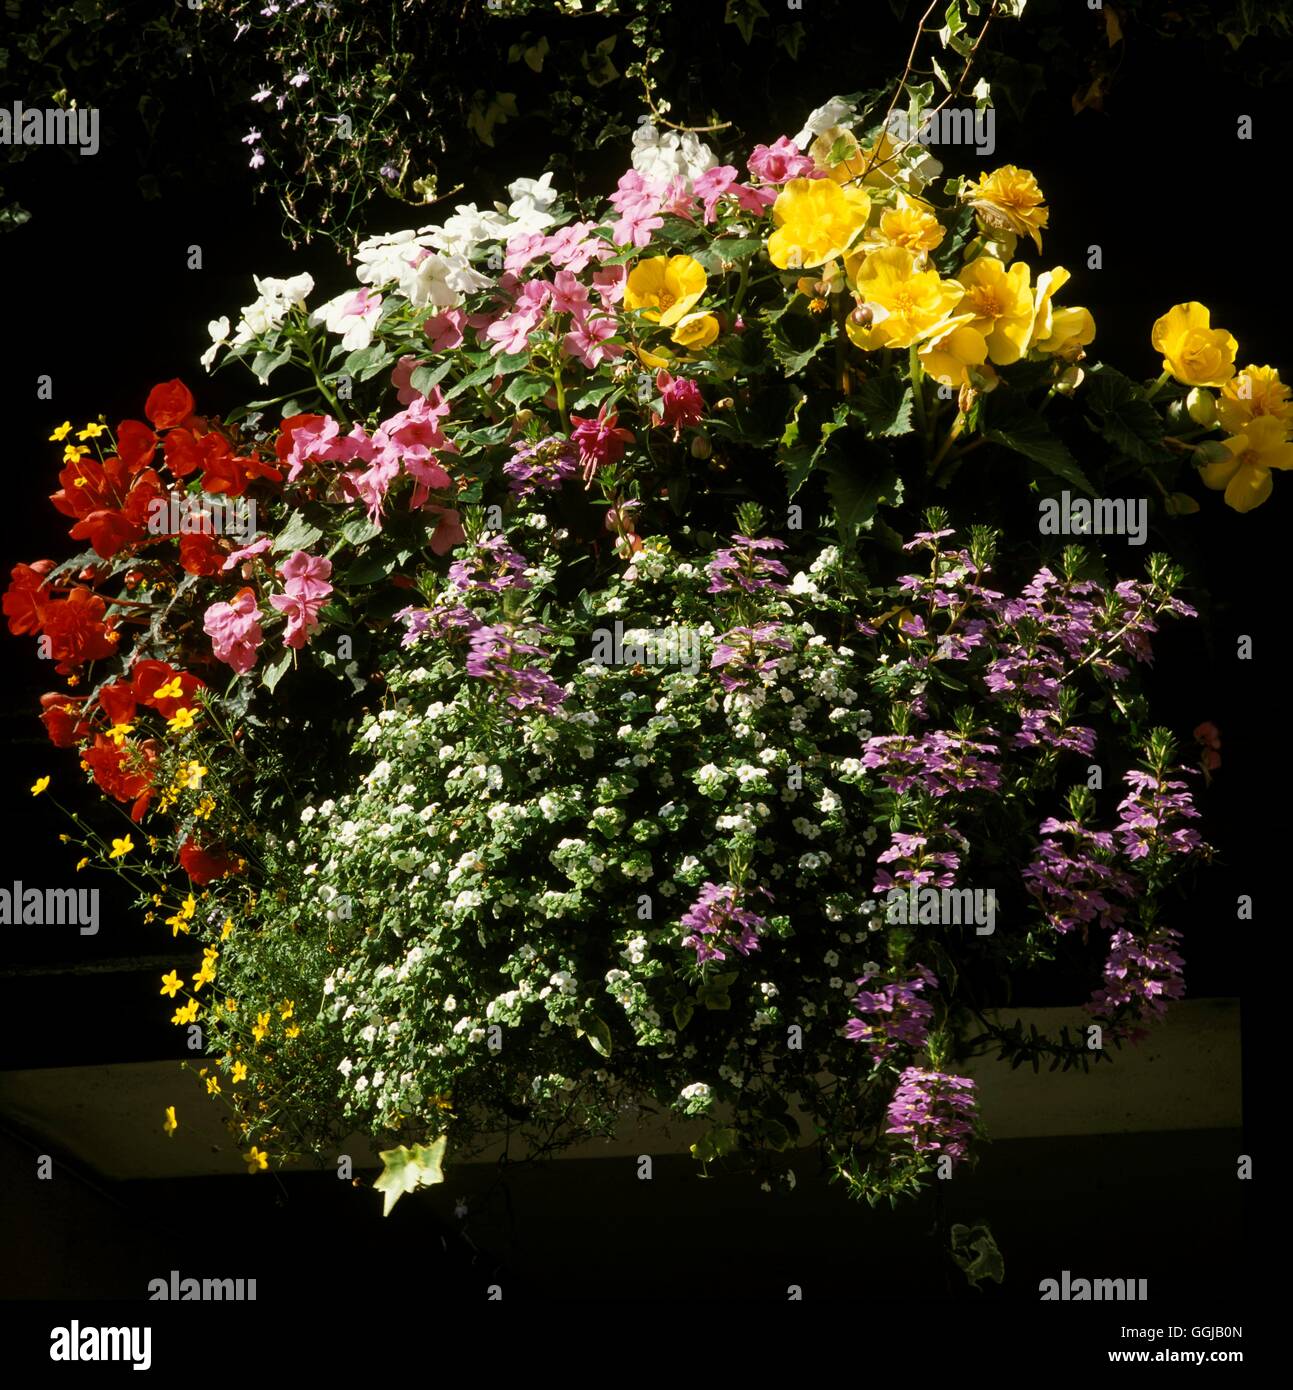 Hanging Baskets with Begonias, Impatiens, Bidens, Bacopa and Scaviola  Date: 07.10.2008  HBA103909 Stock Photo